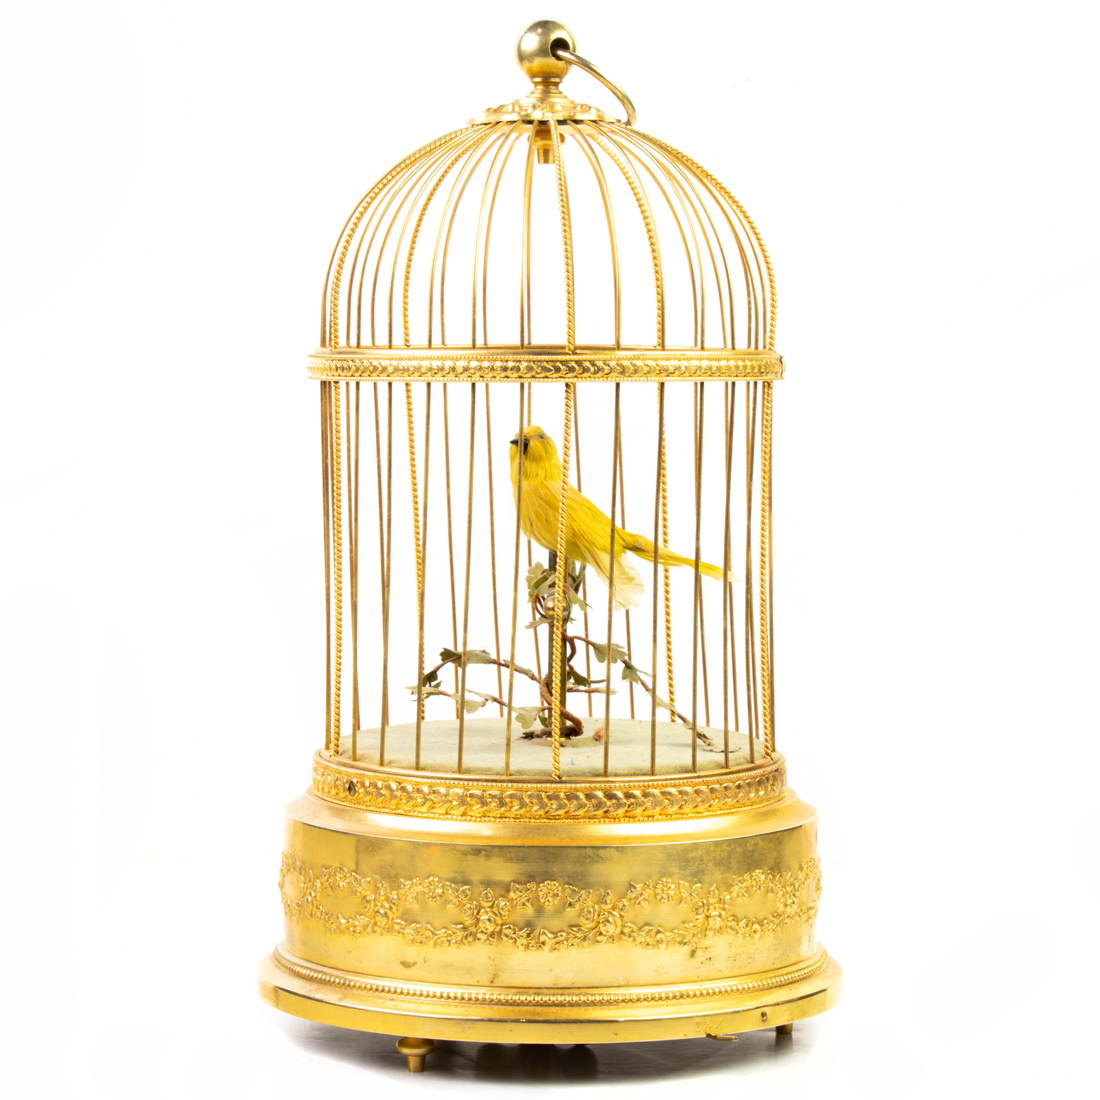 A FRENCH SINGING BIRD IN CAGE AUTOMATON  2d0e93